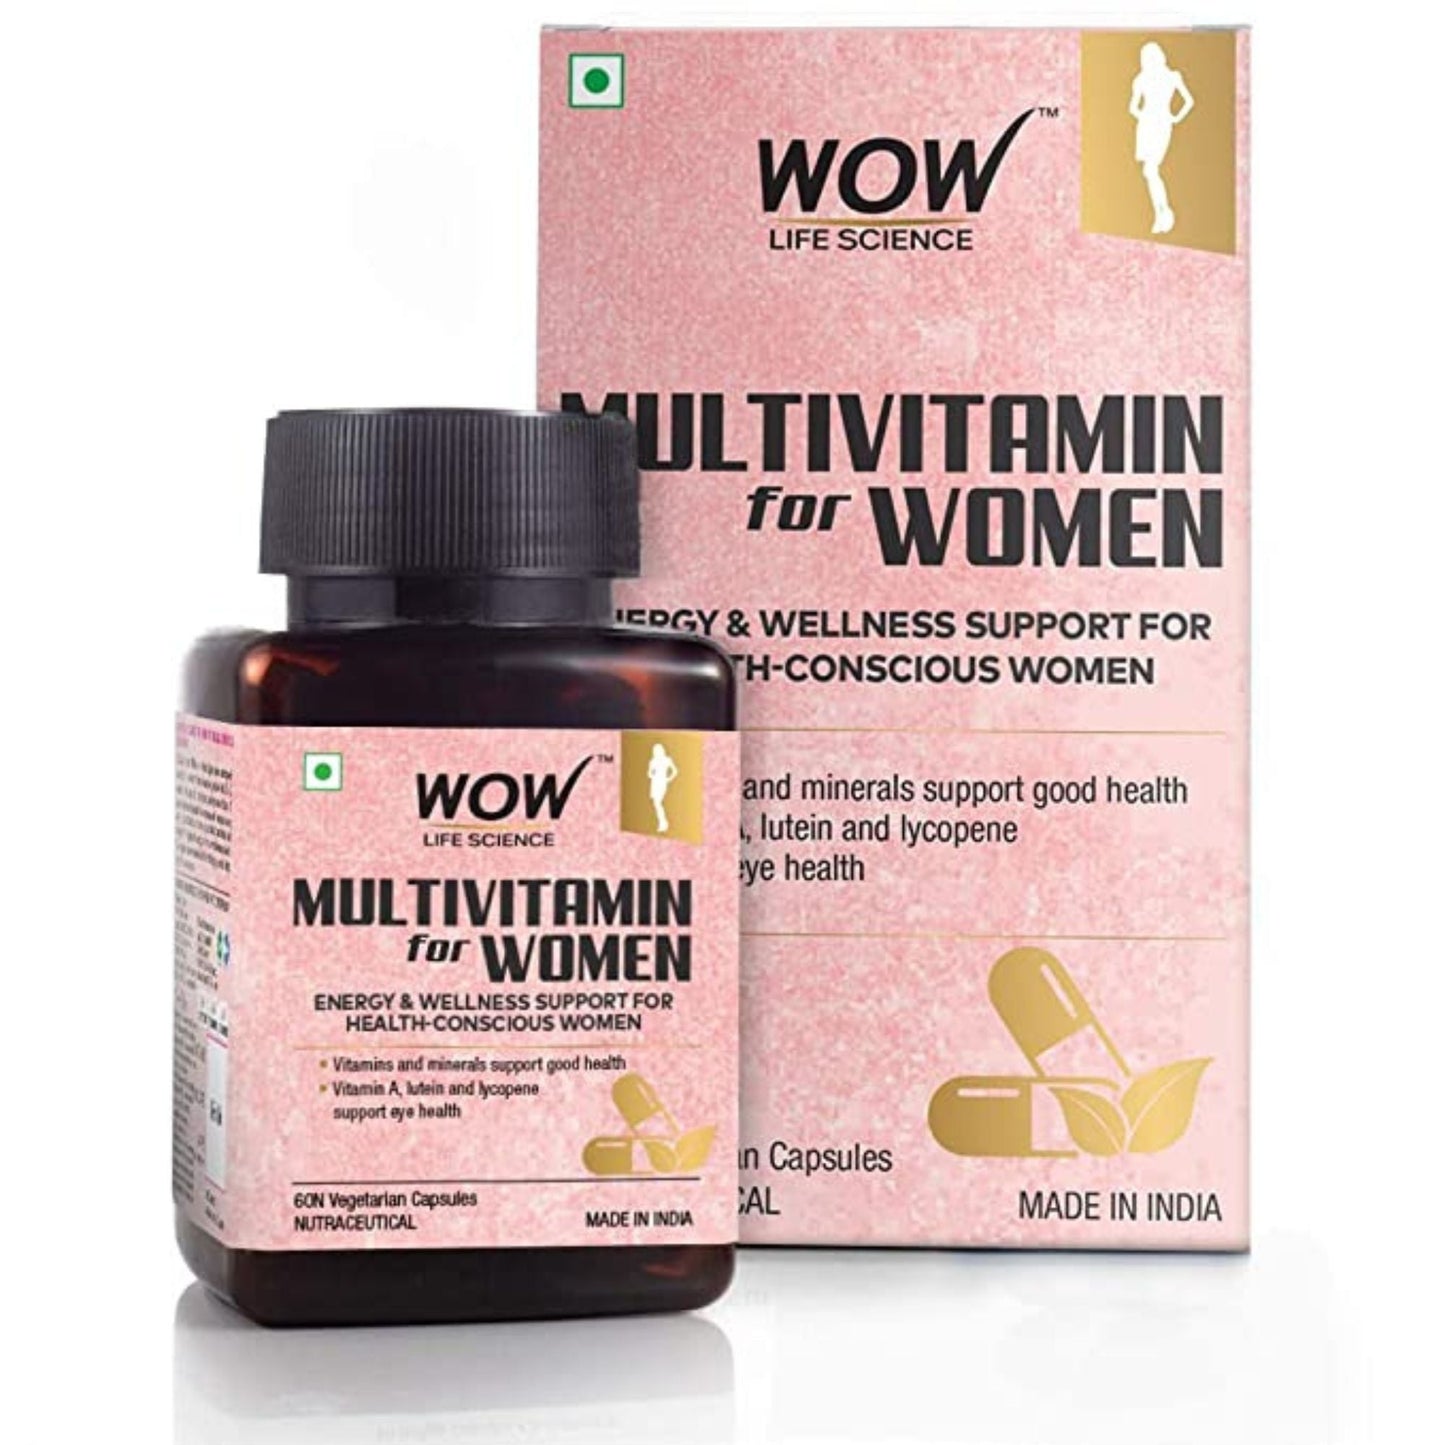 WOW Life Science Multivitamin for Women - Veg Capsules 60 Count - with Vitamin A, Lutein & Lycopene